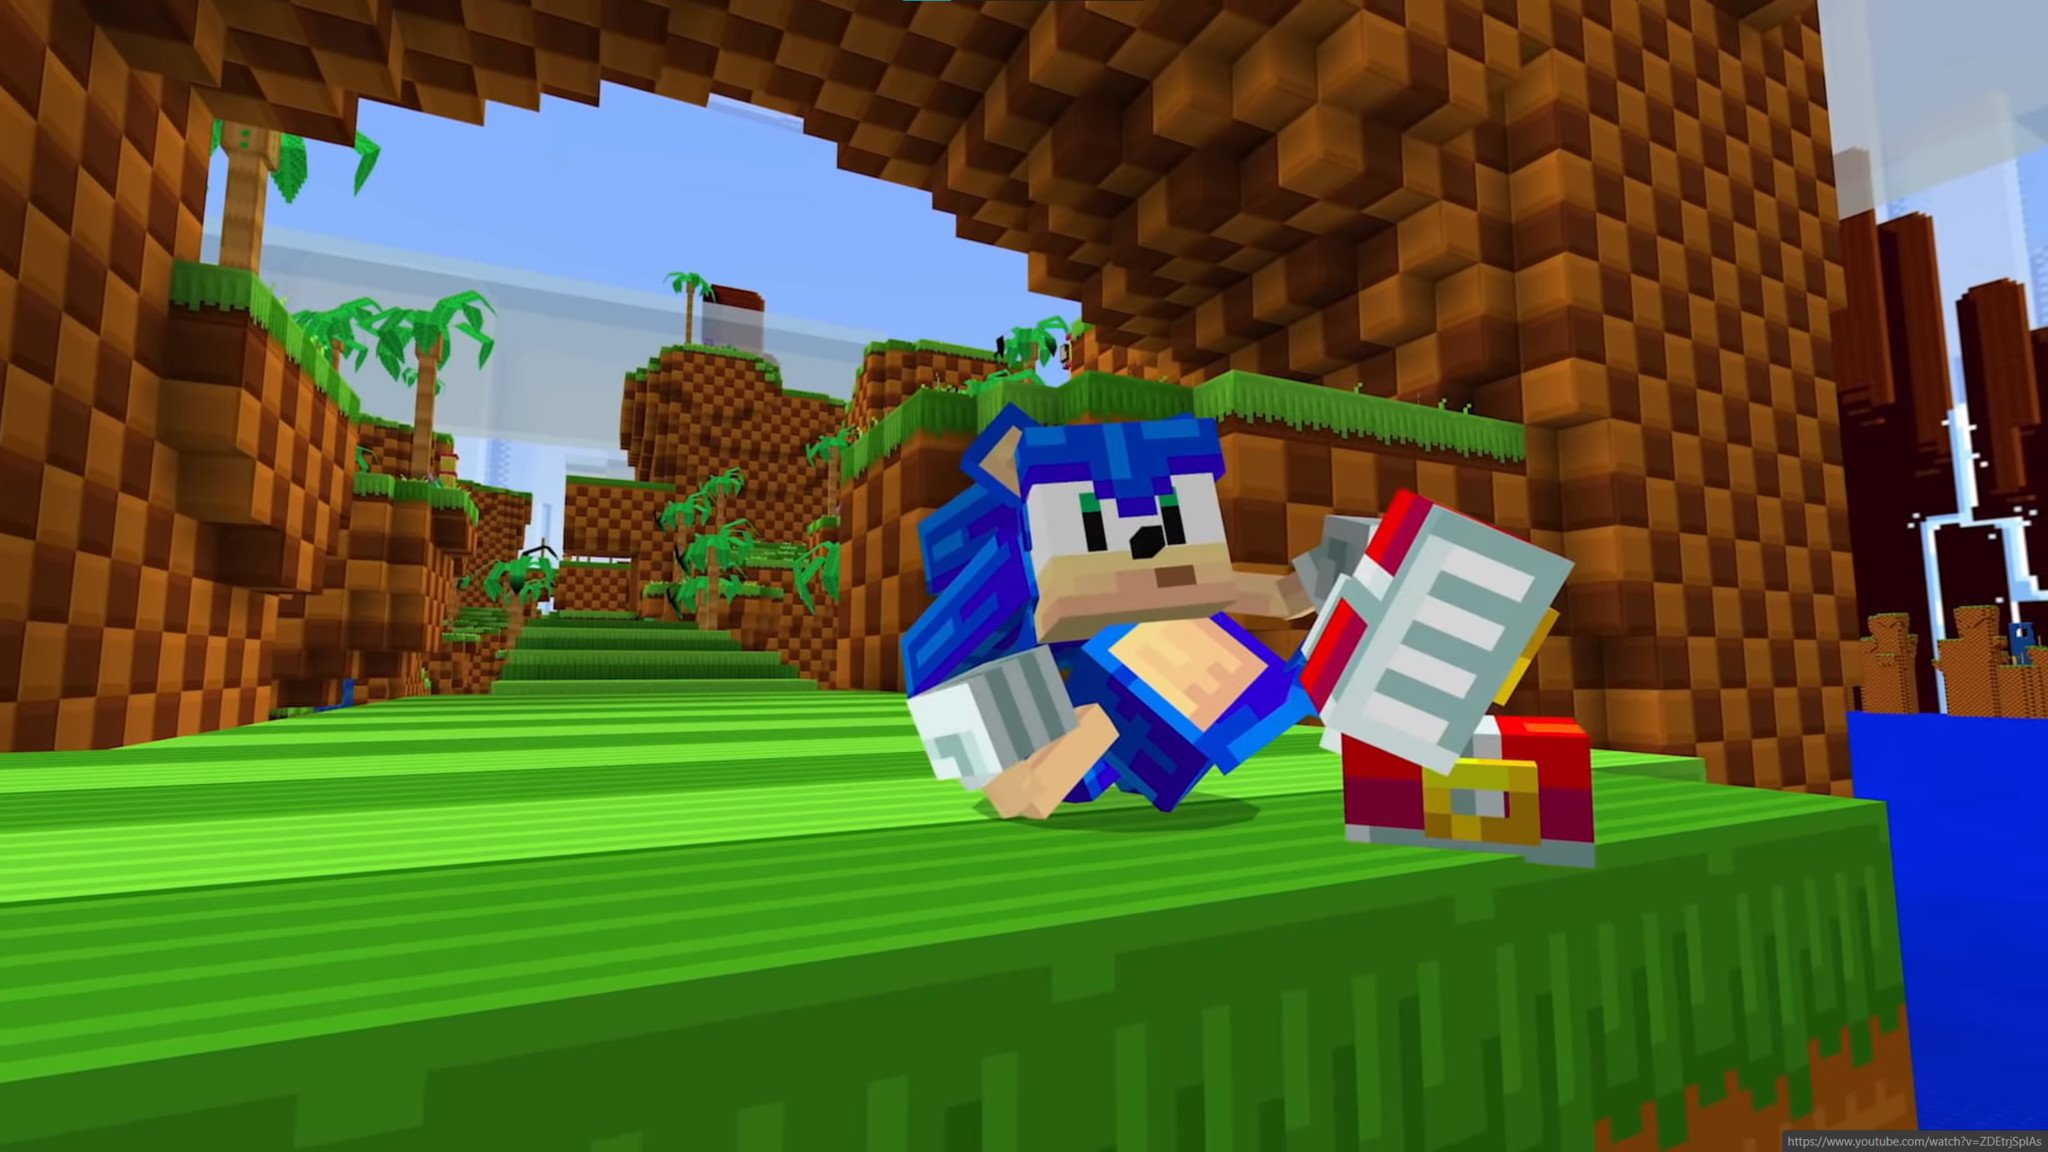 All Sonic The Hedgehog Official Minecraft DLC Skins! 